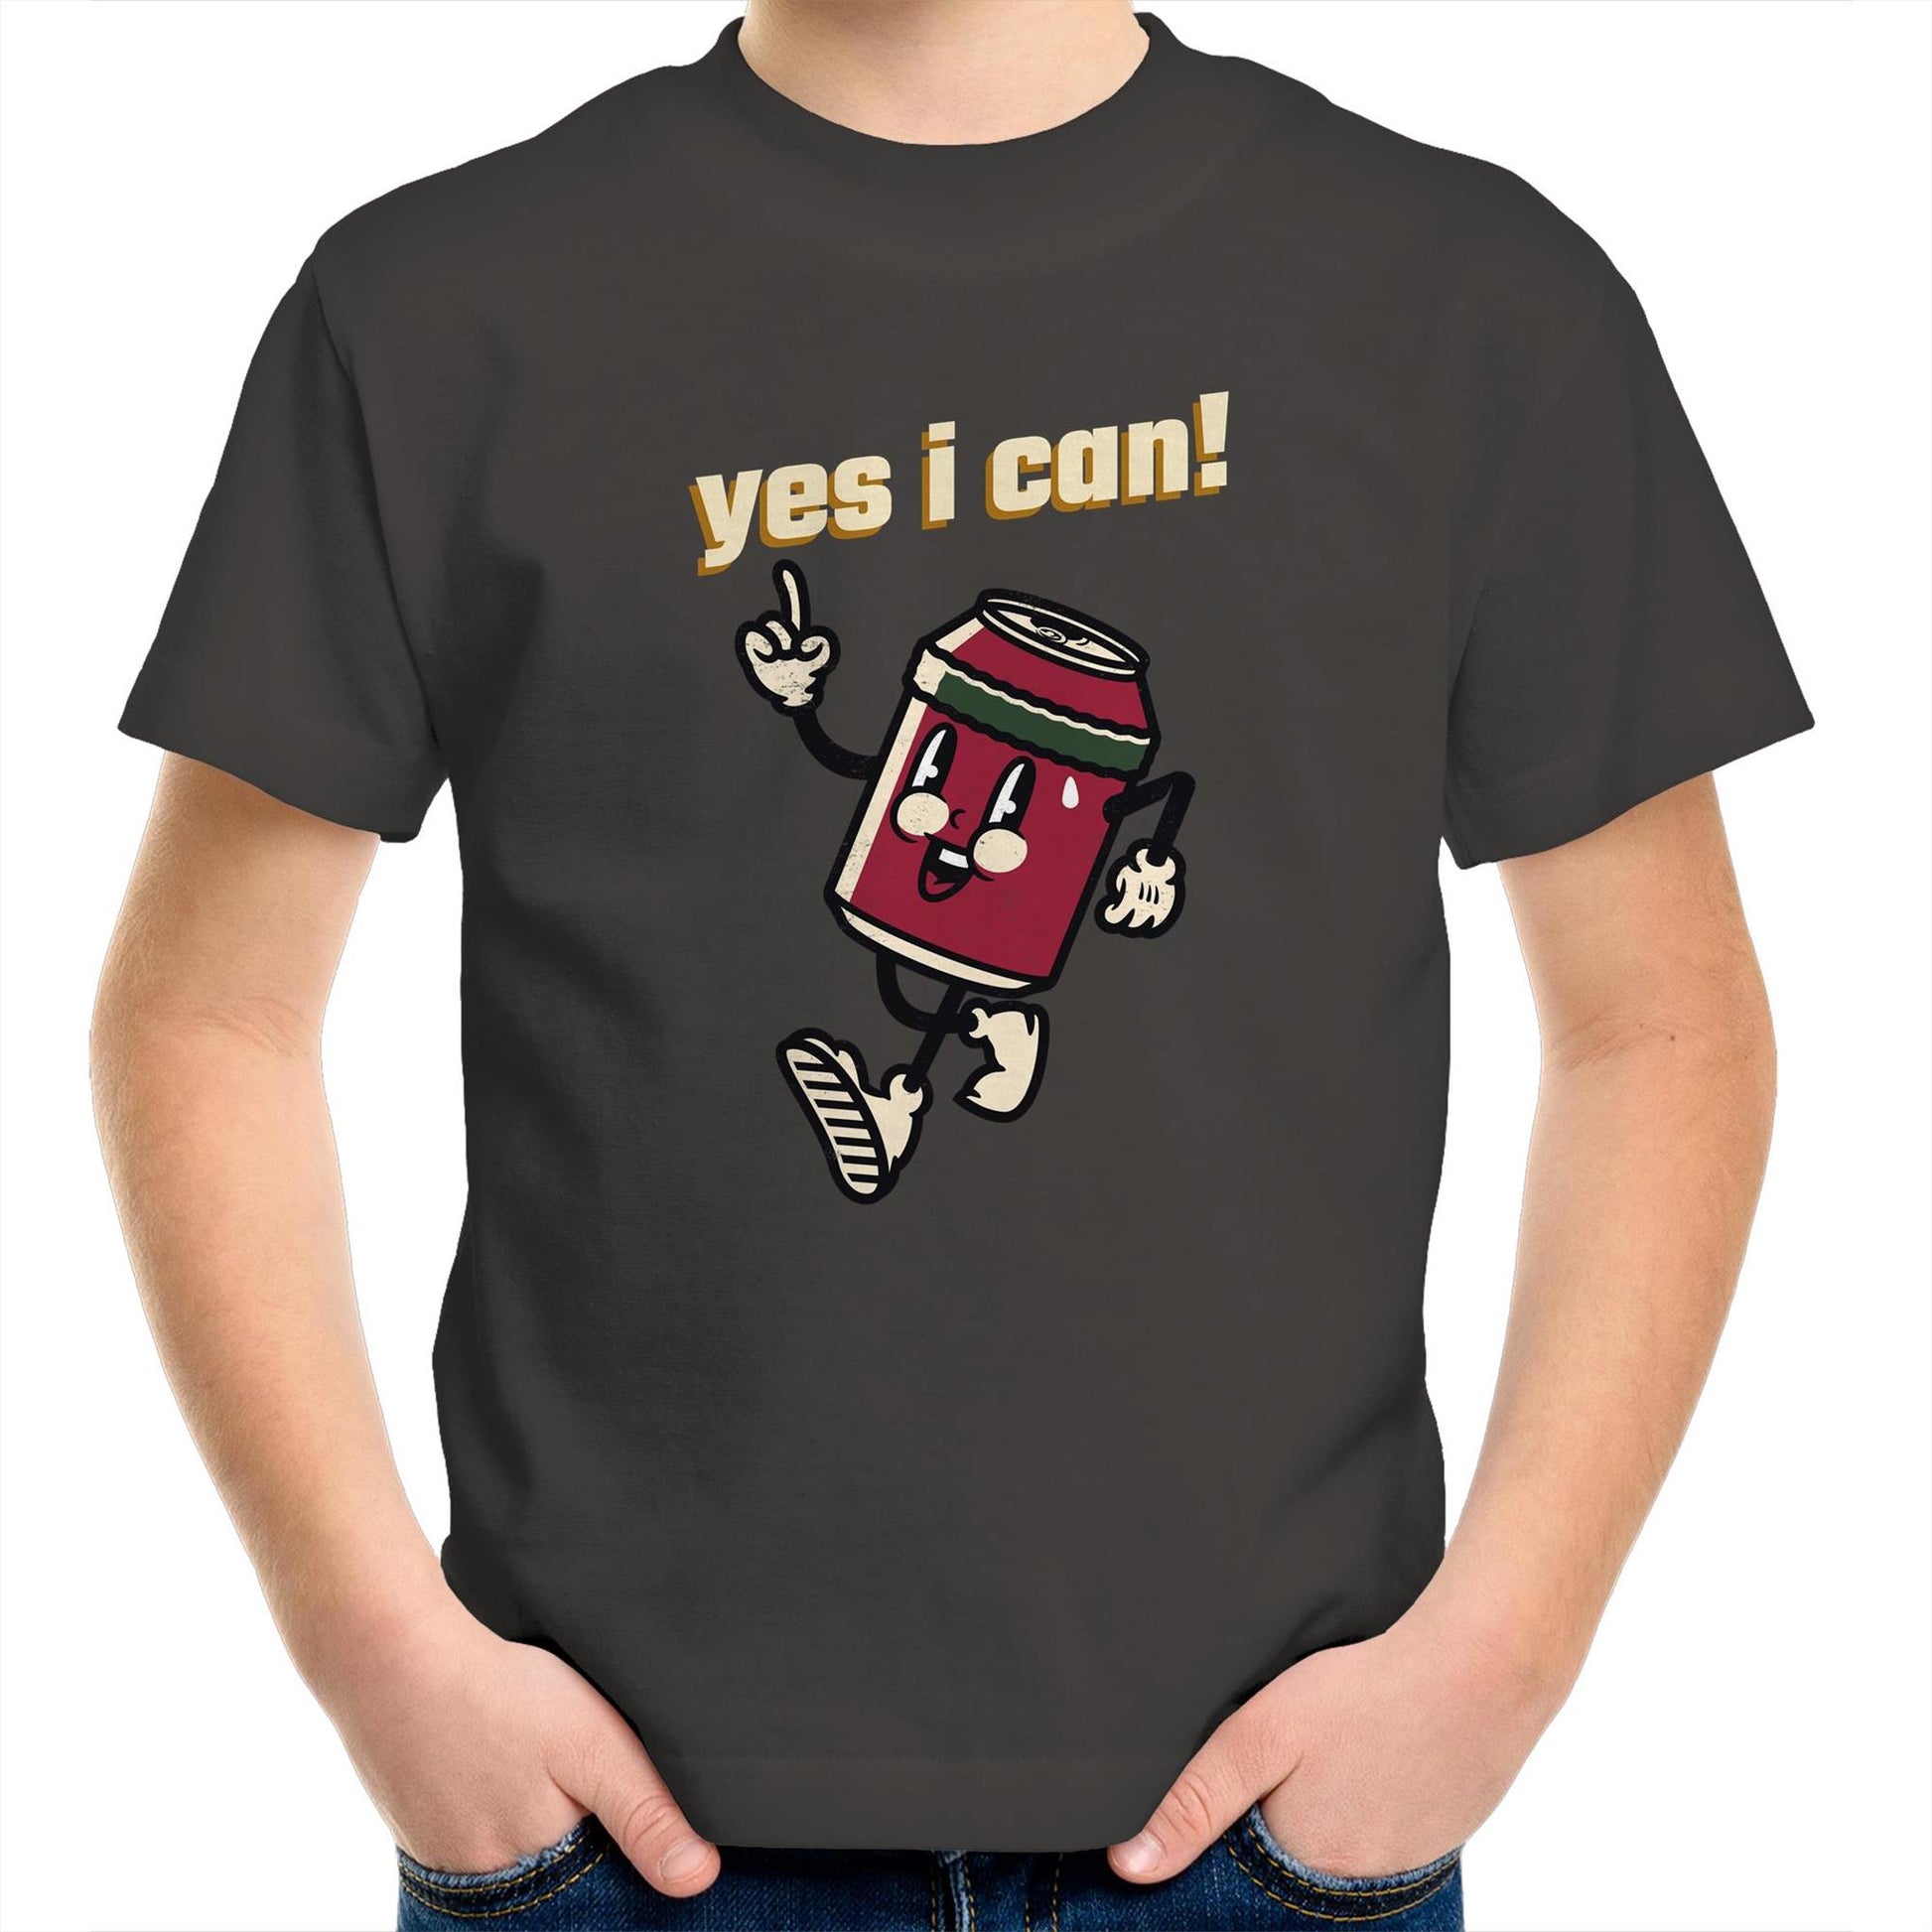 Yes I Can! - Kids Youth Crew T-Shirt Charcoal Kids Youth T-shirt Motivation Retro